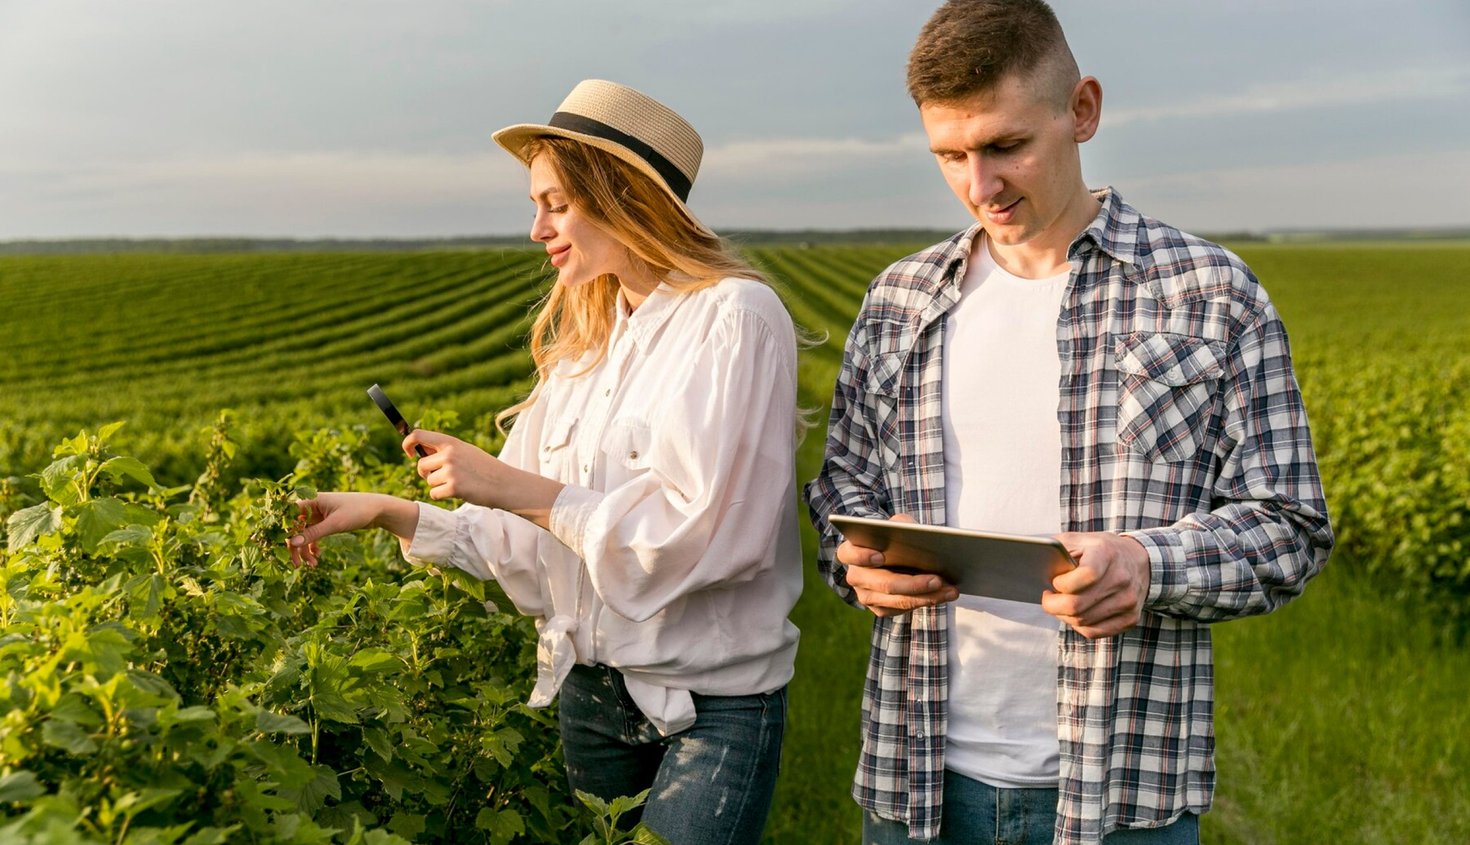 Smart Farming: How Technology Adds Value to Agriculture